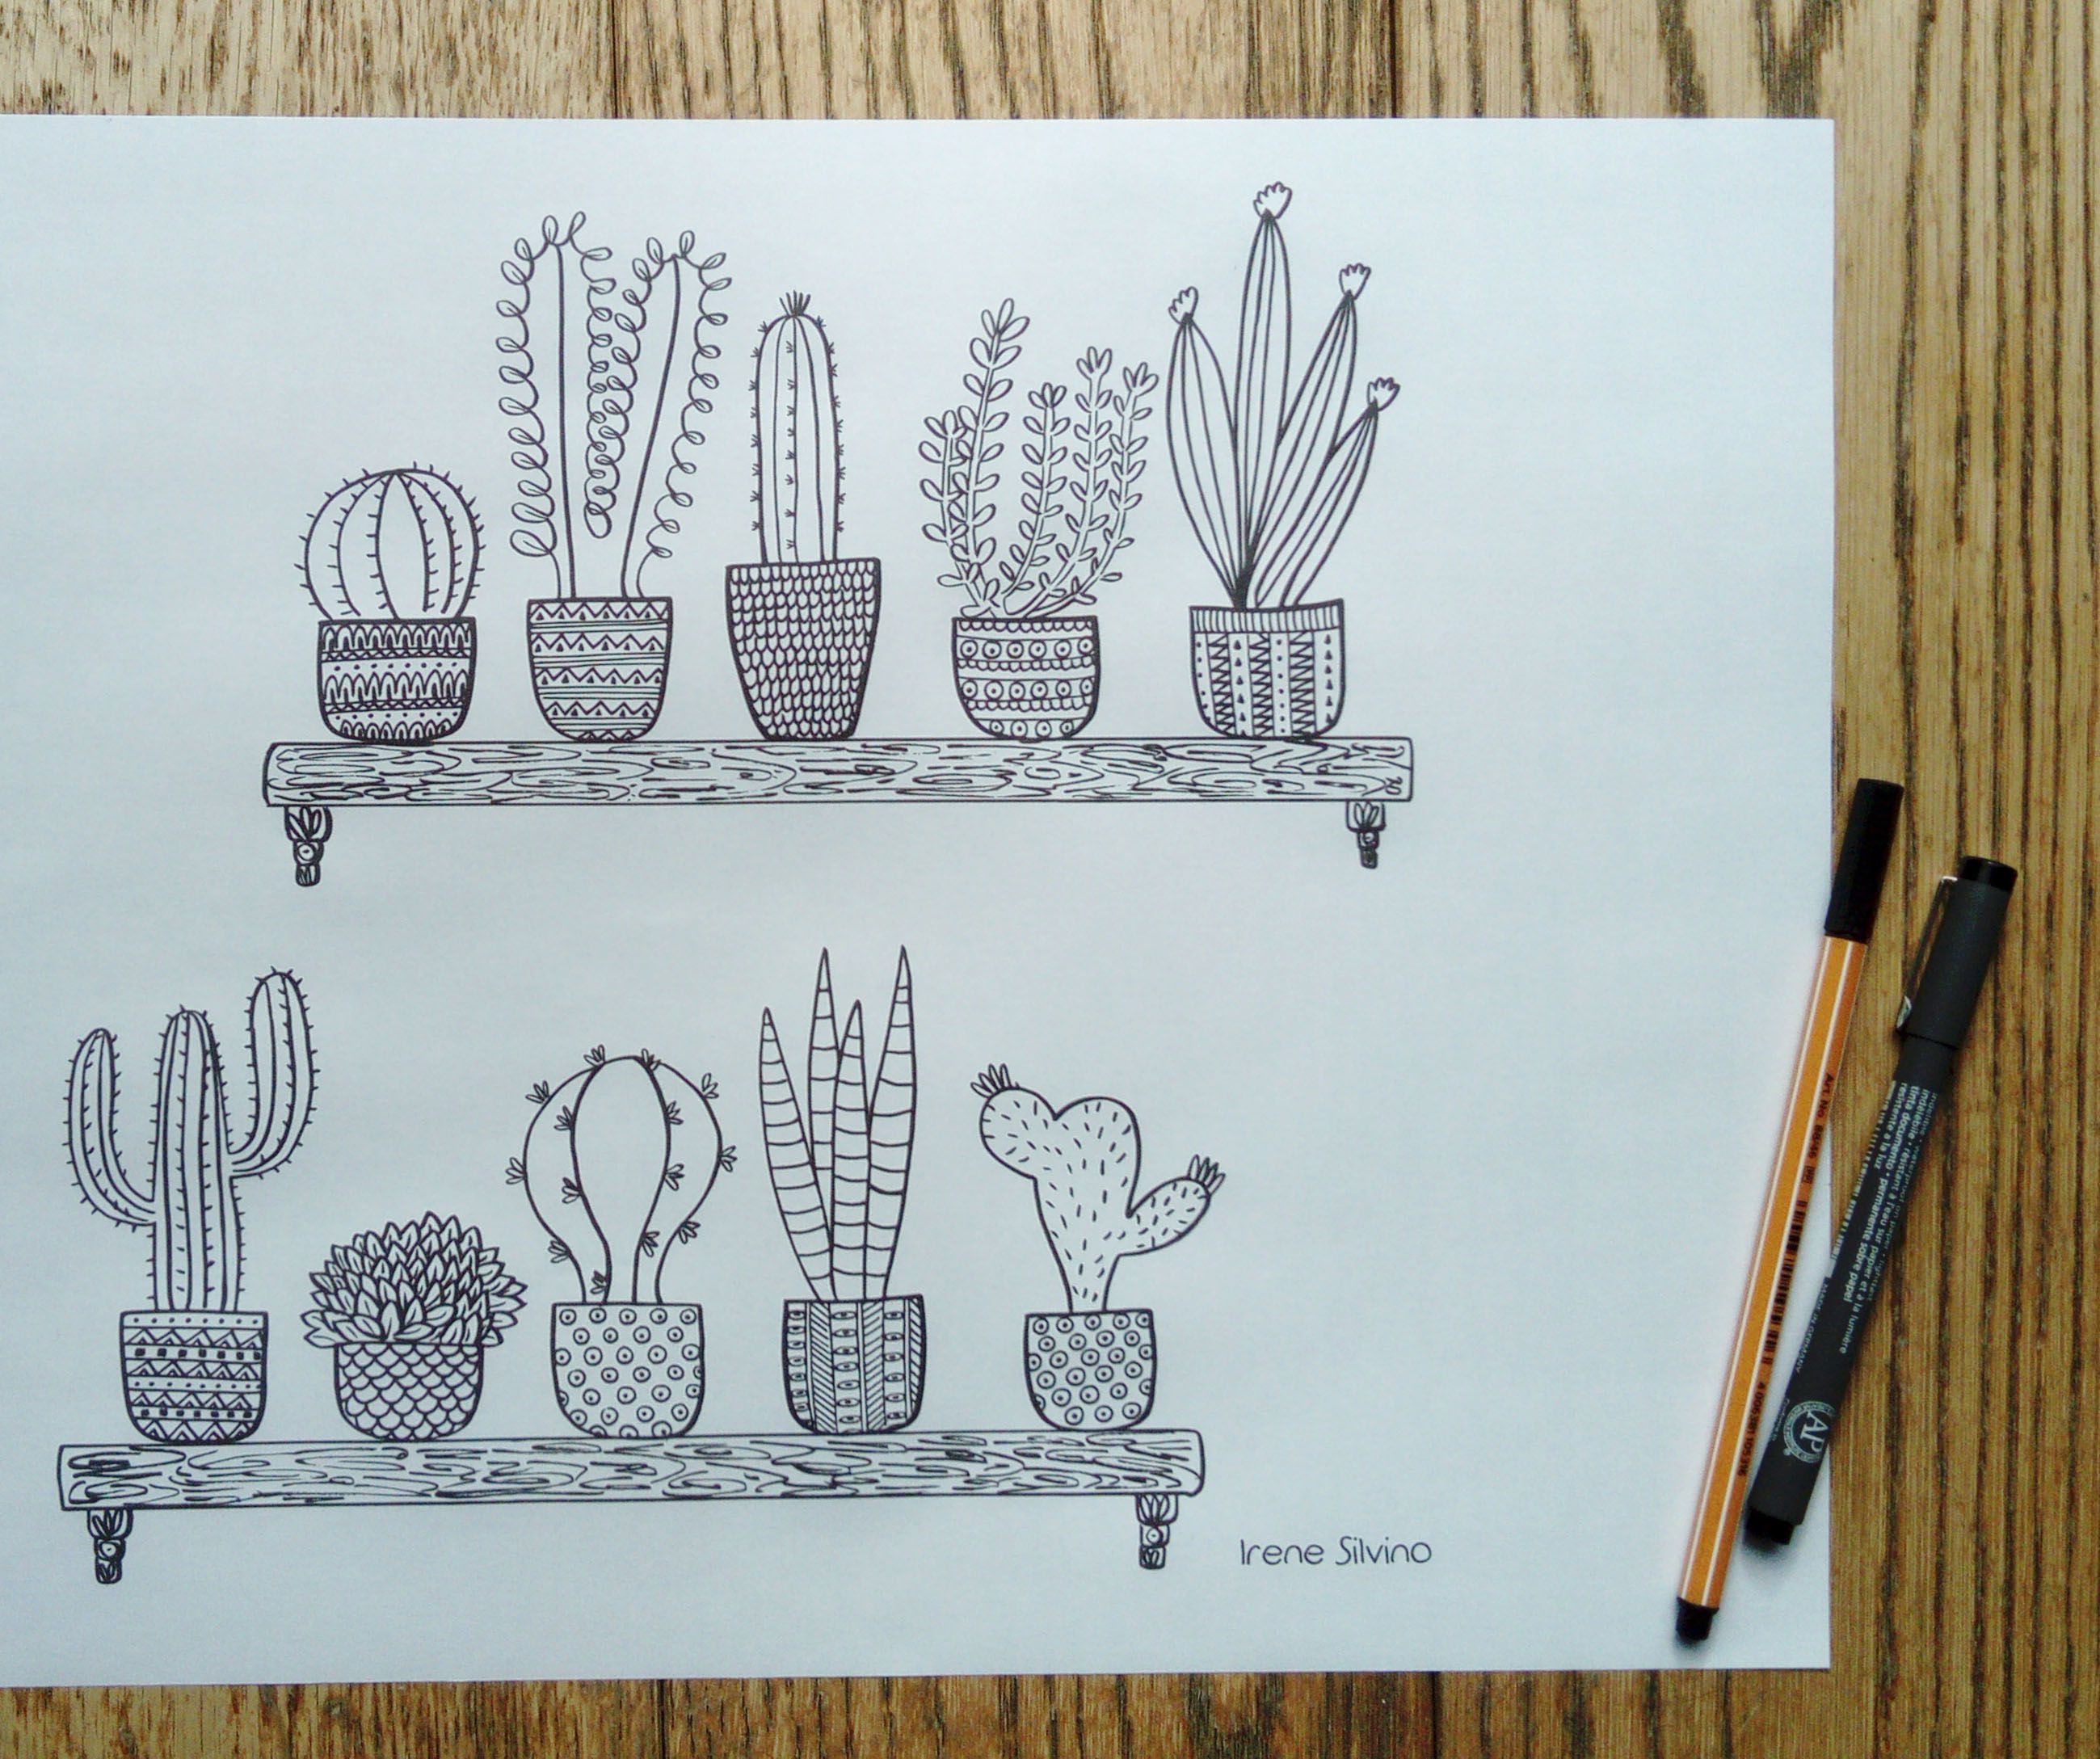 Prickly cacti and succulents